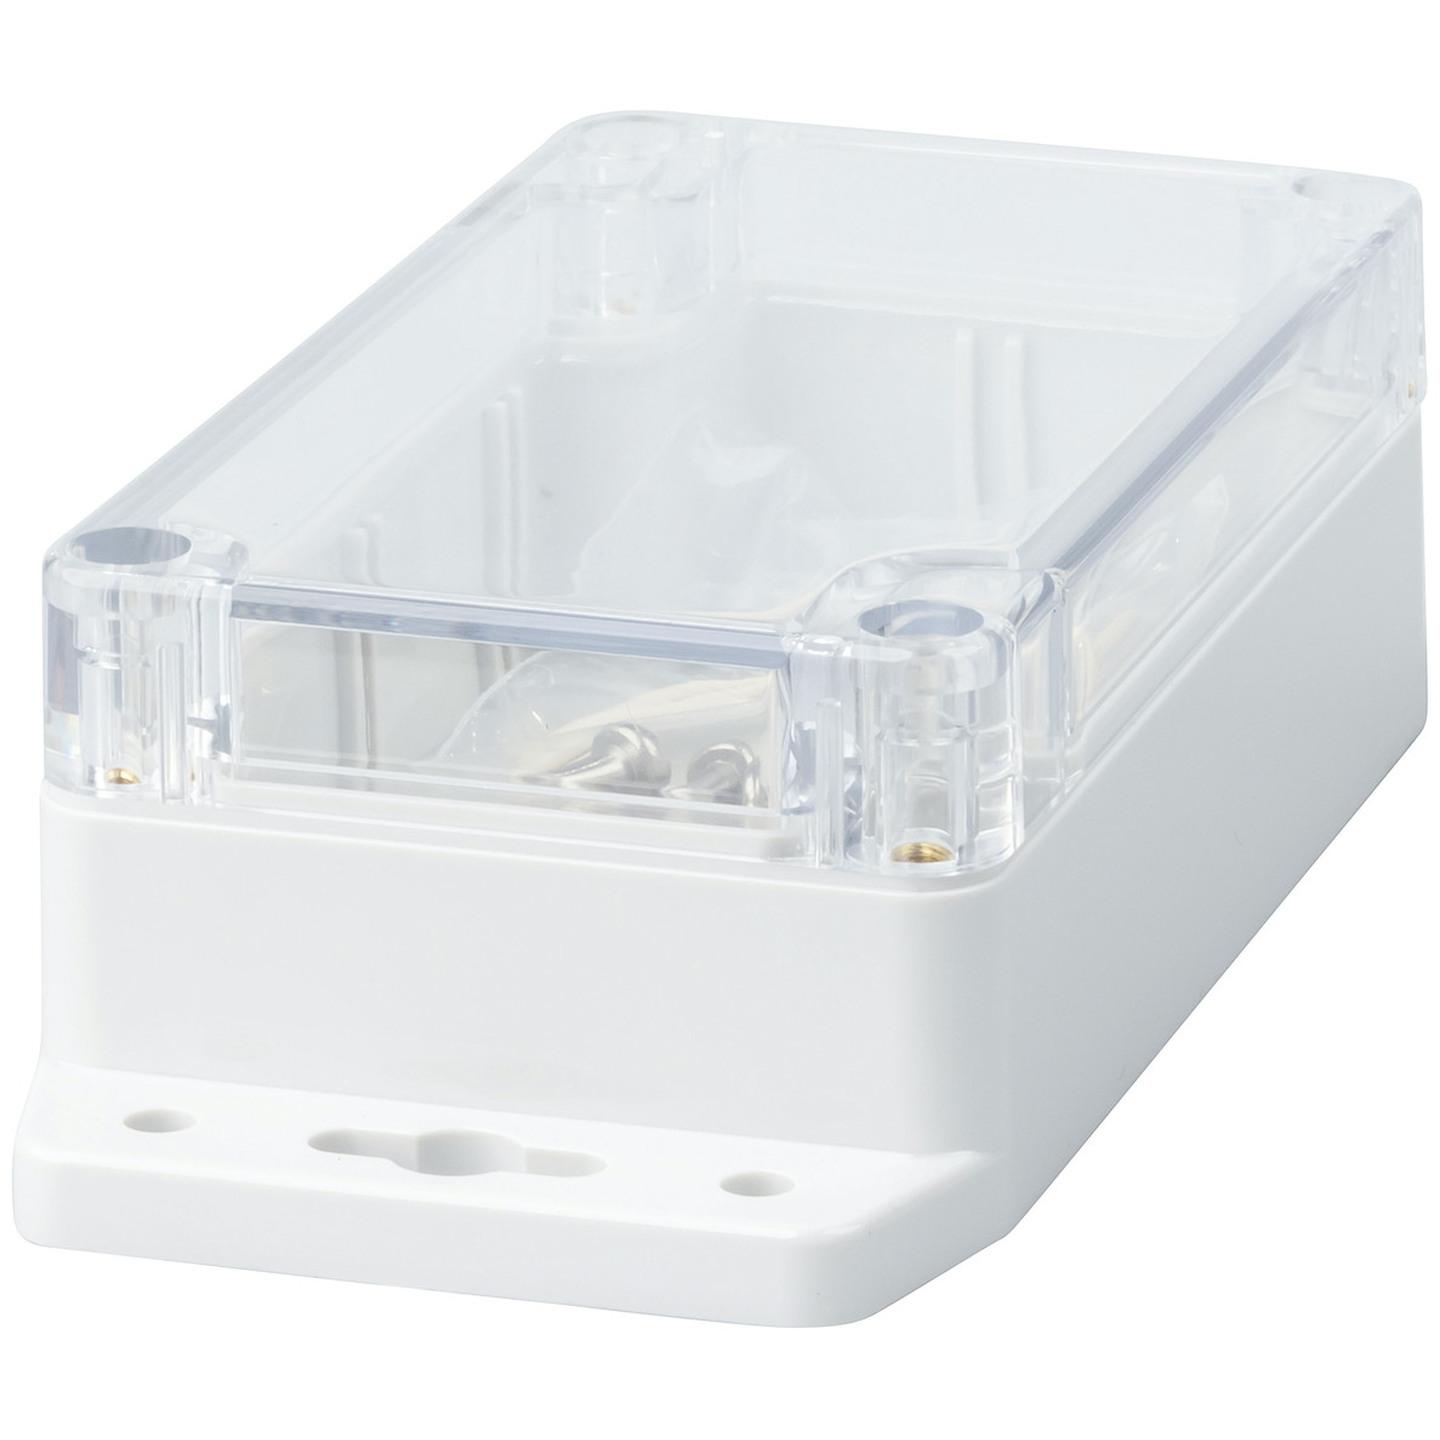 IP65 Sealed Polycarbonate Enclosure with Mounting Flange - 115W x 65D x 40Hmm